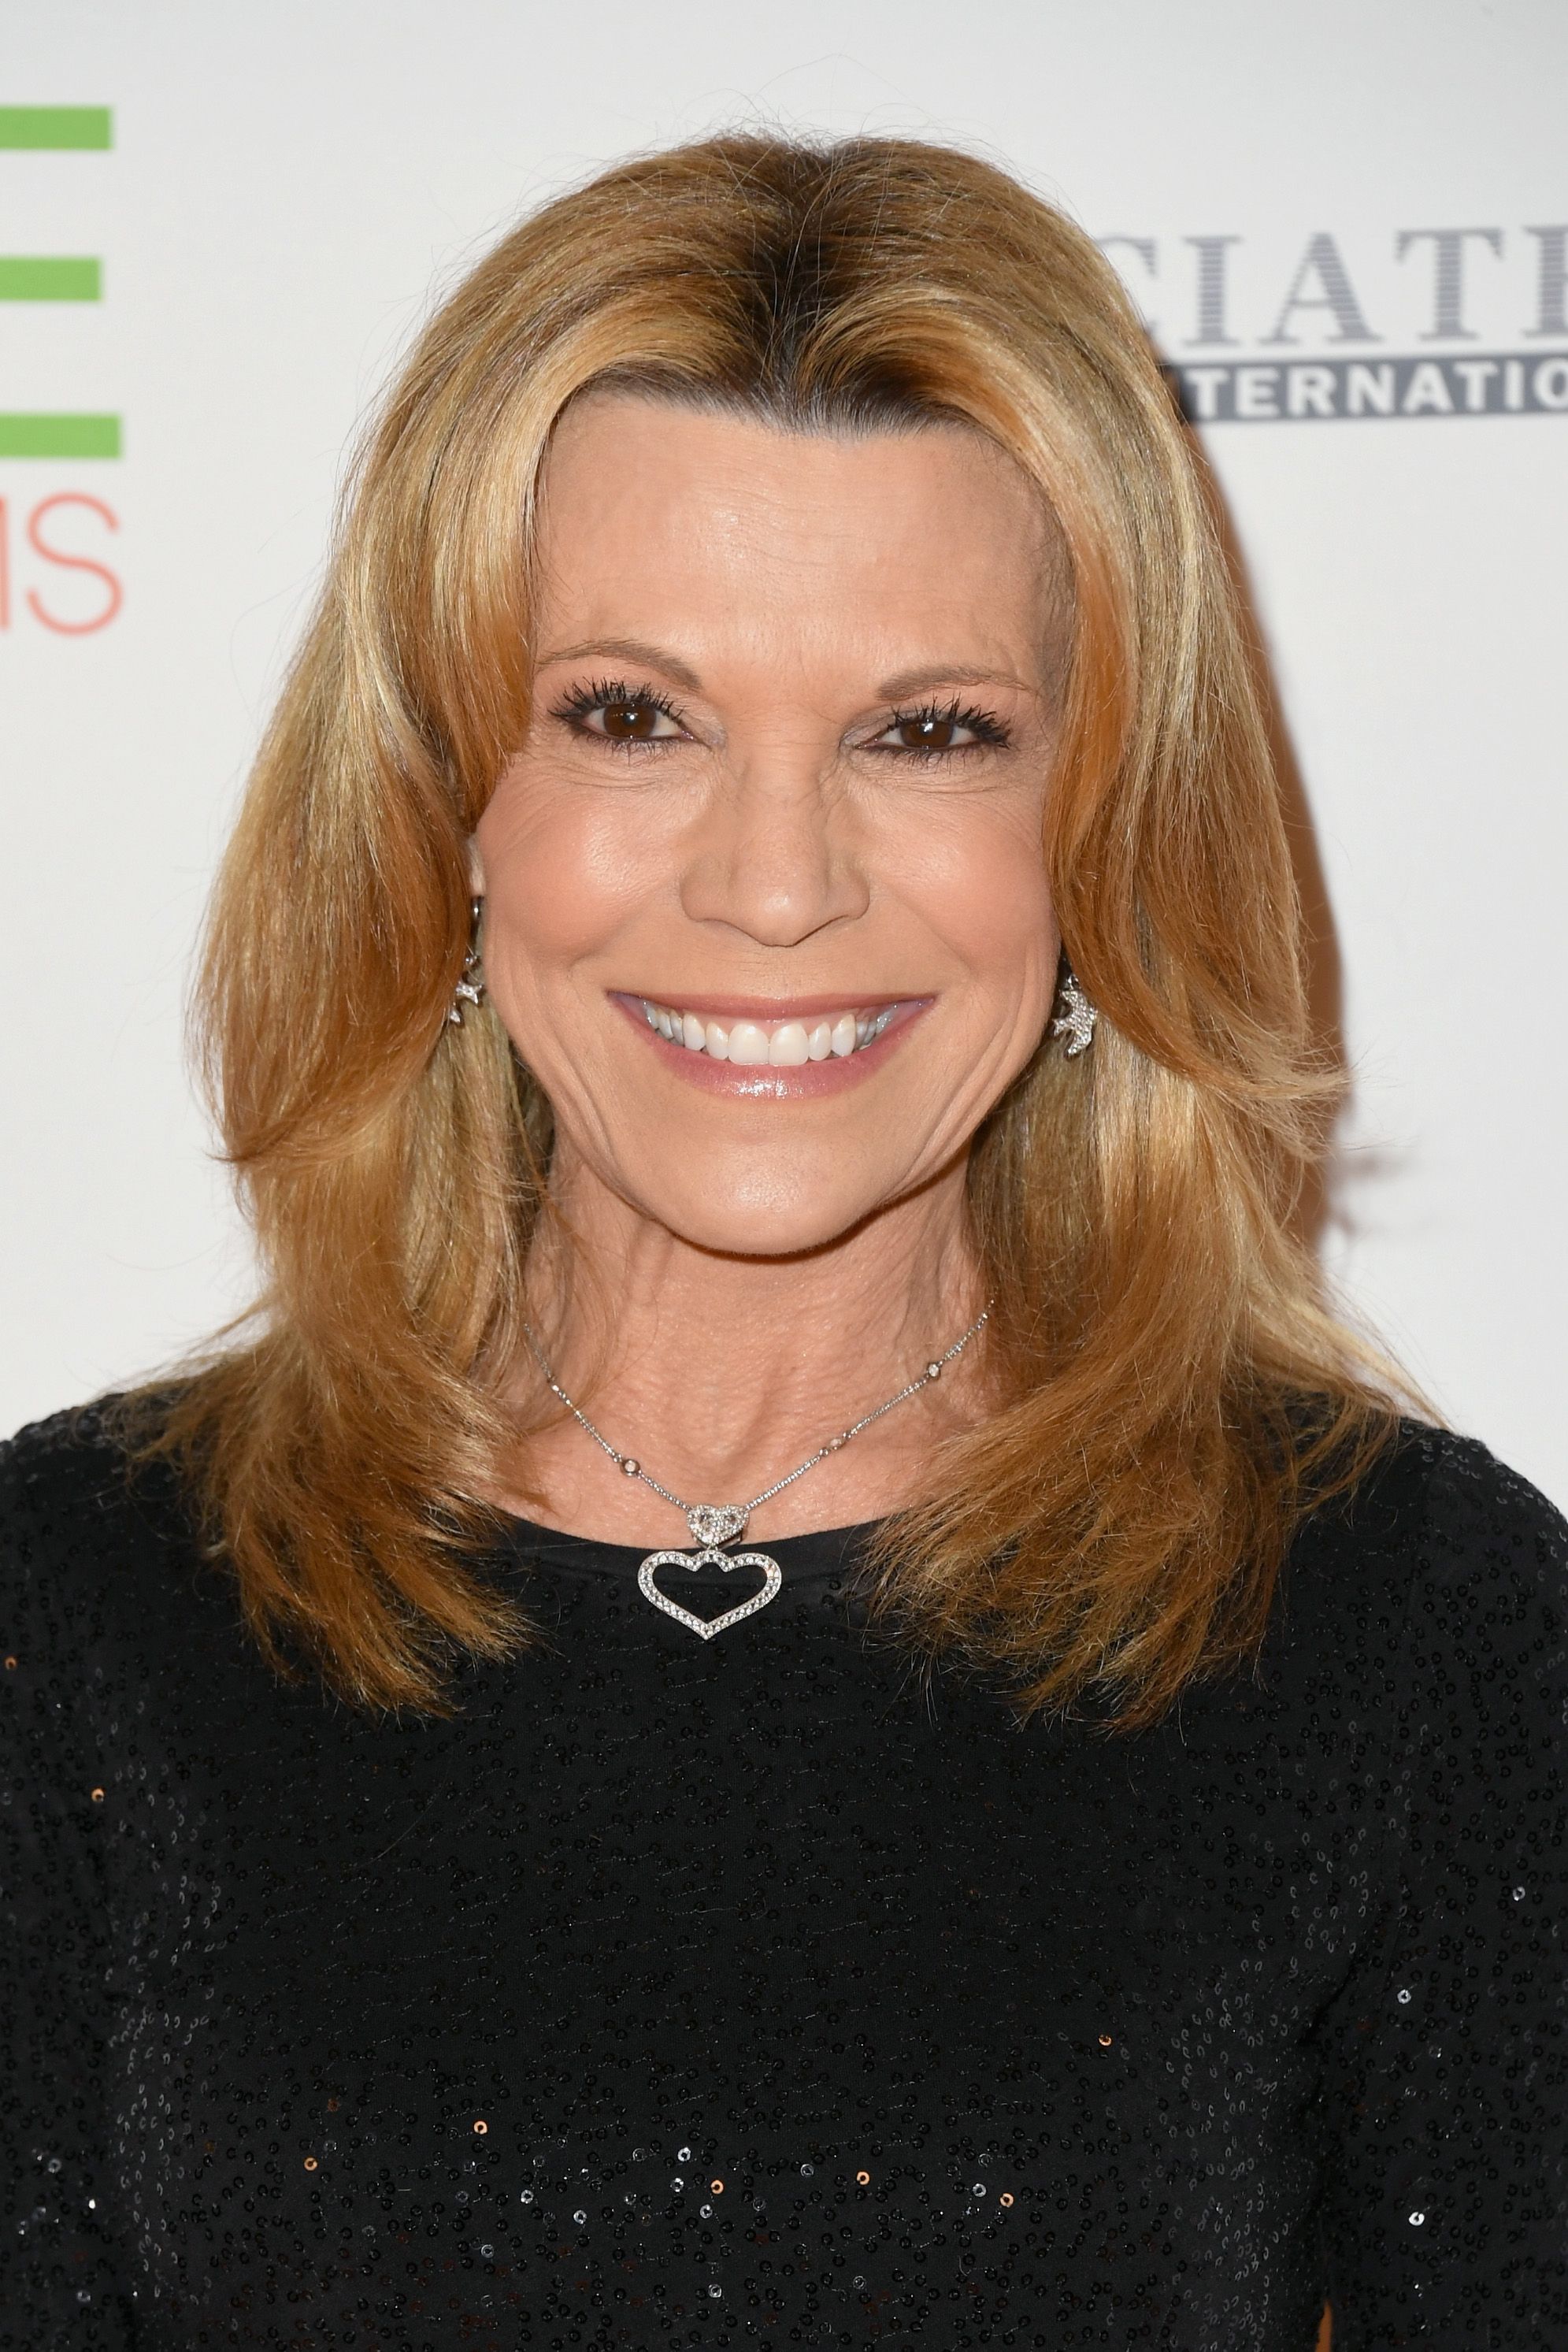 Vanna White at the 25th Annual Race To Erase MS Gala at The Beverly Hilton Hotel on April 20, 2018 | Getty Images